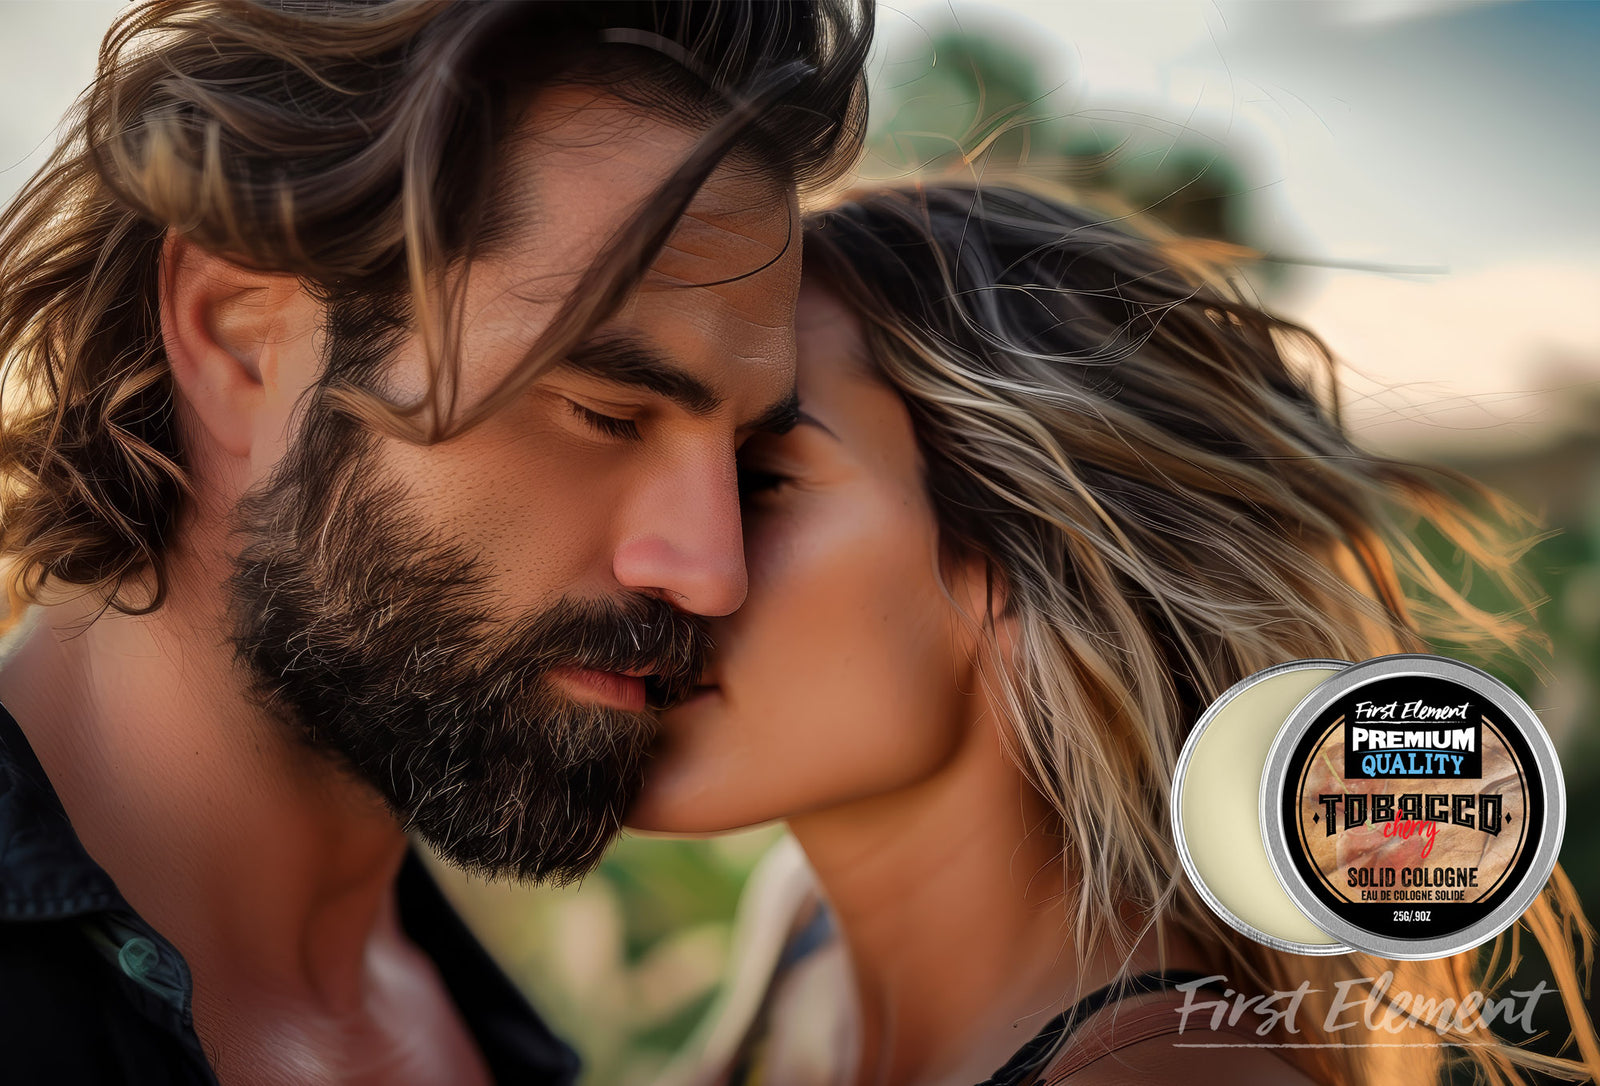 An attractive couple nearly kissing with an inset image of Tobacco Cherry Solid Cologne